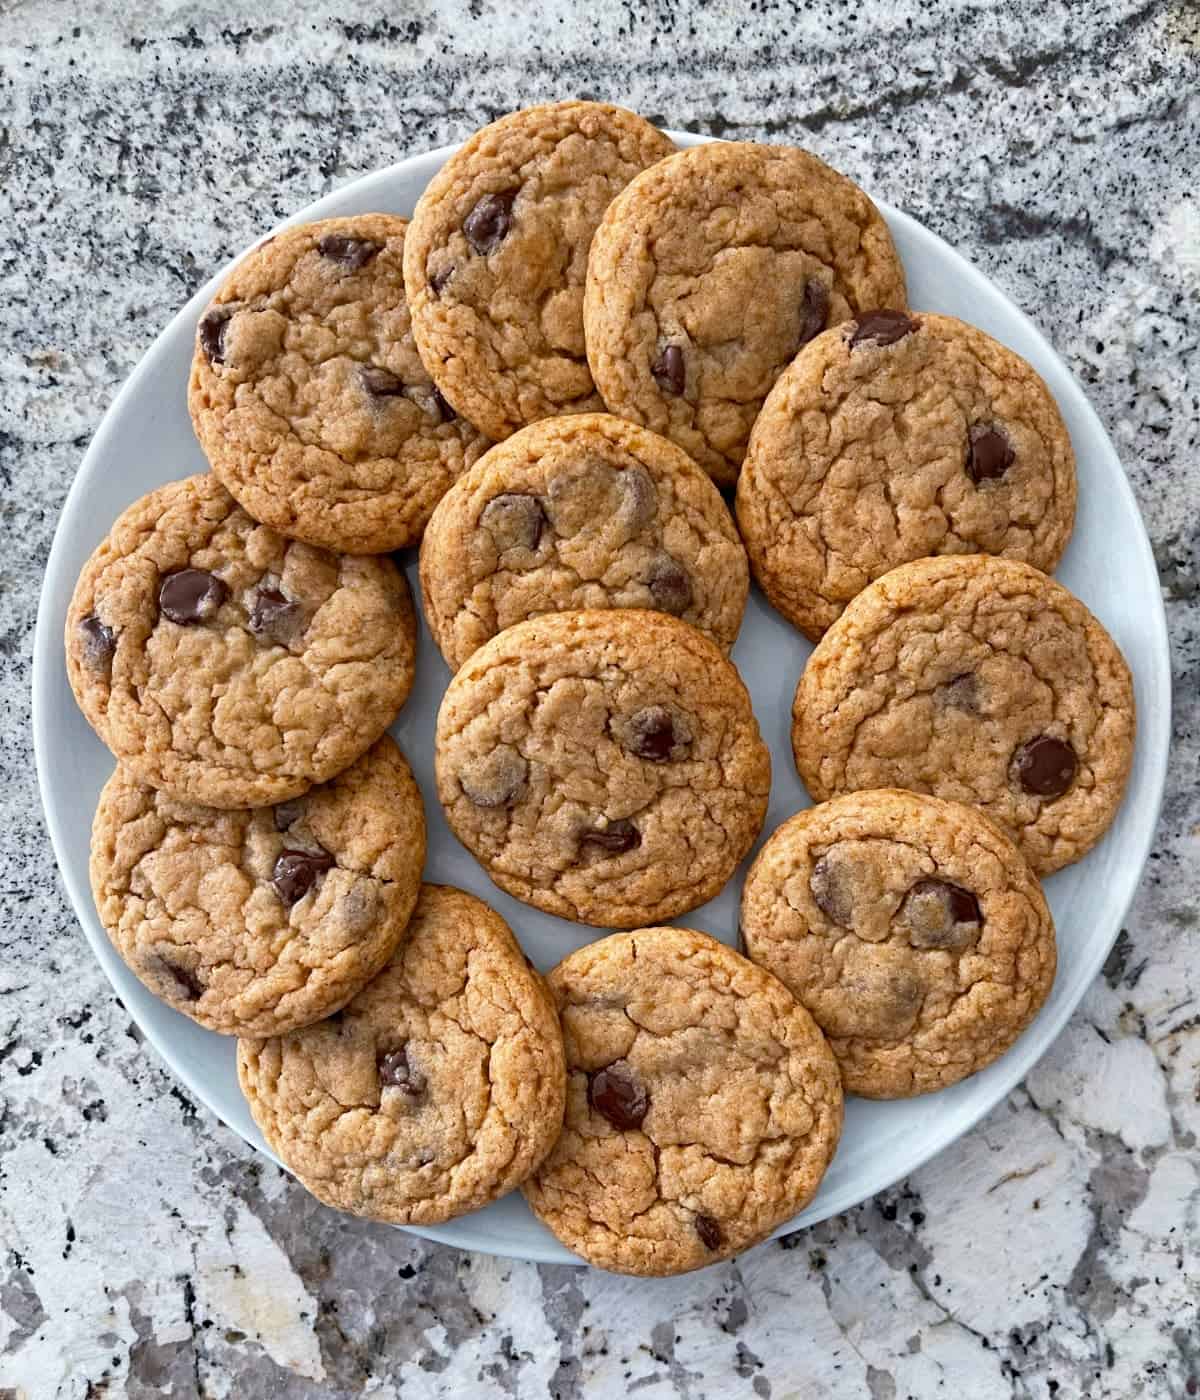 Halo Top peanut butter chocolate chip light cookies on round blue serving platter.